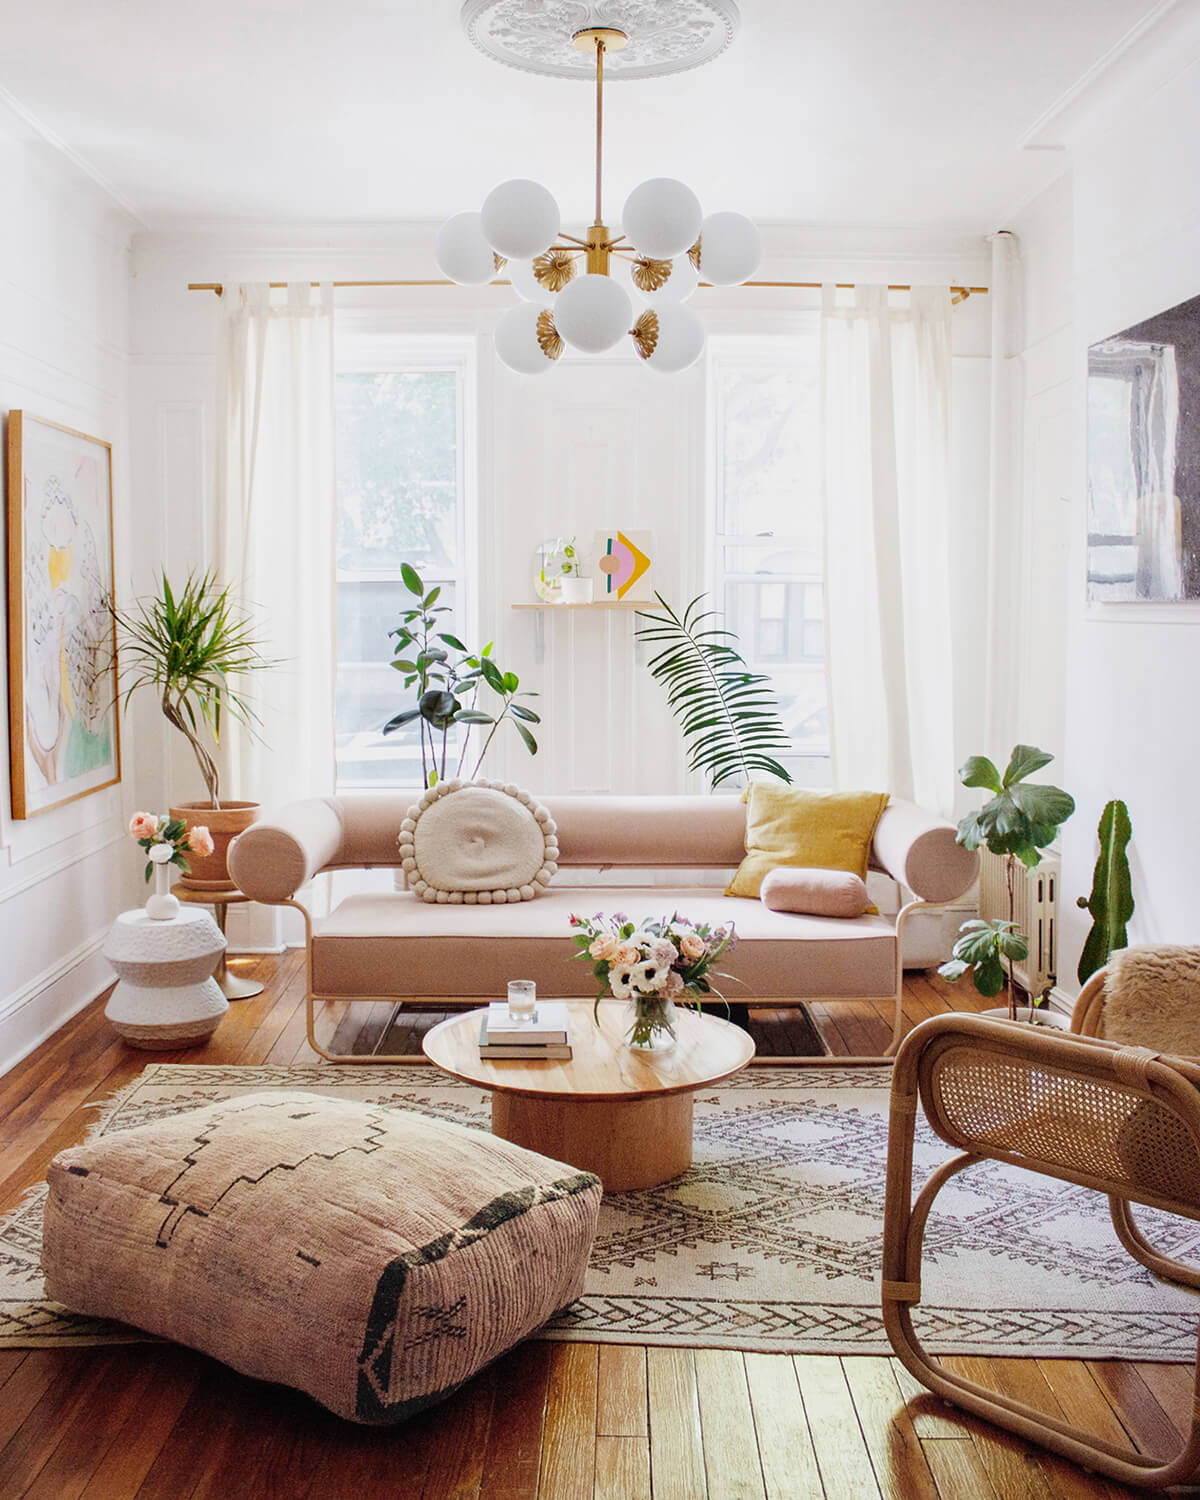 Decorating Small Space Living Room: Maximizing Style And Functionality